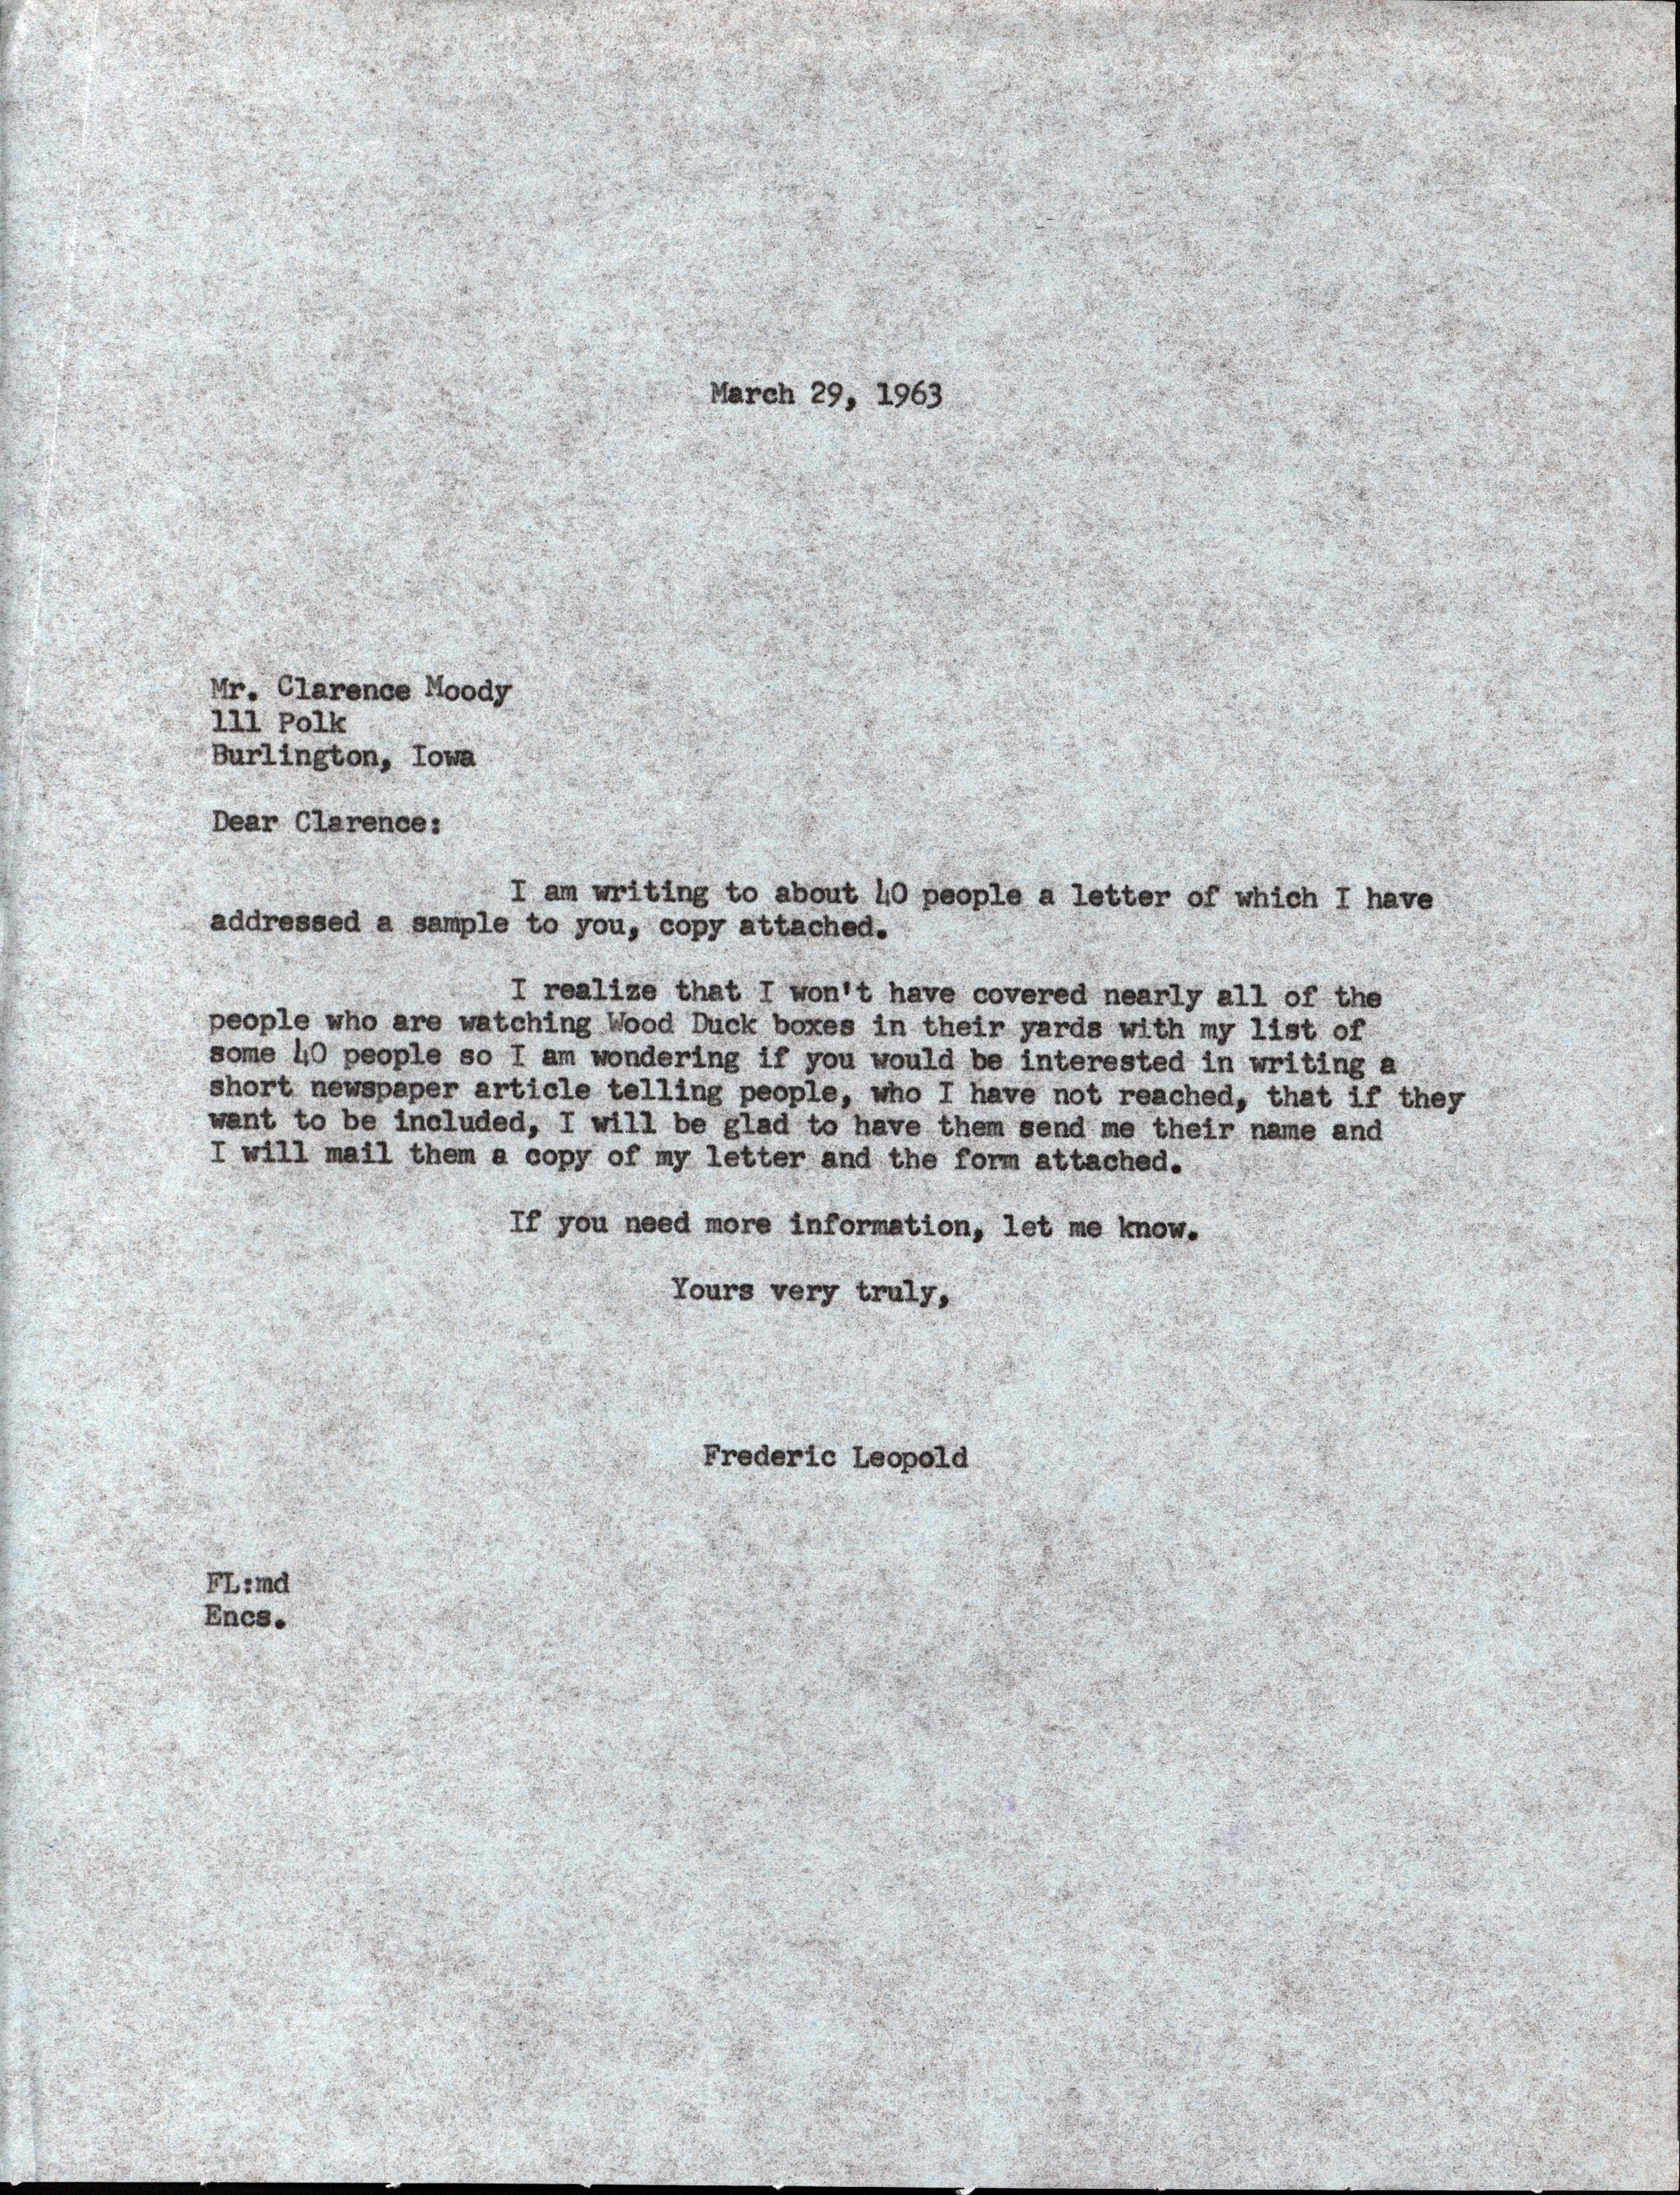 Frederic Leopold letter to Clarence W. Moody regarding a Wood Duck study, March 29, 1963